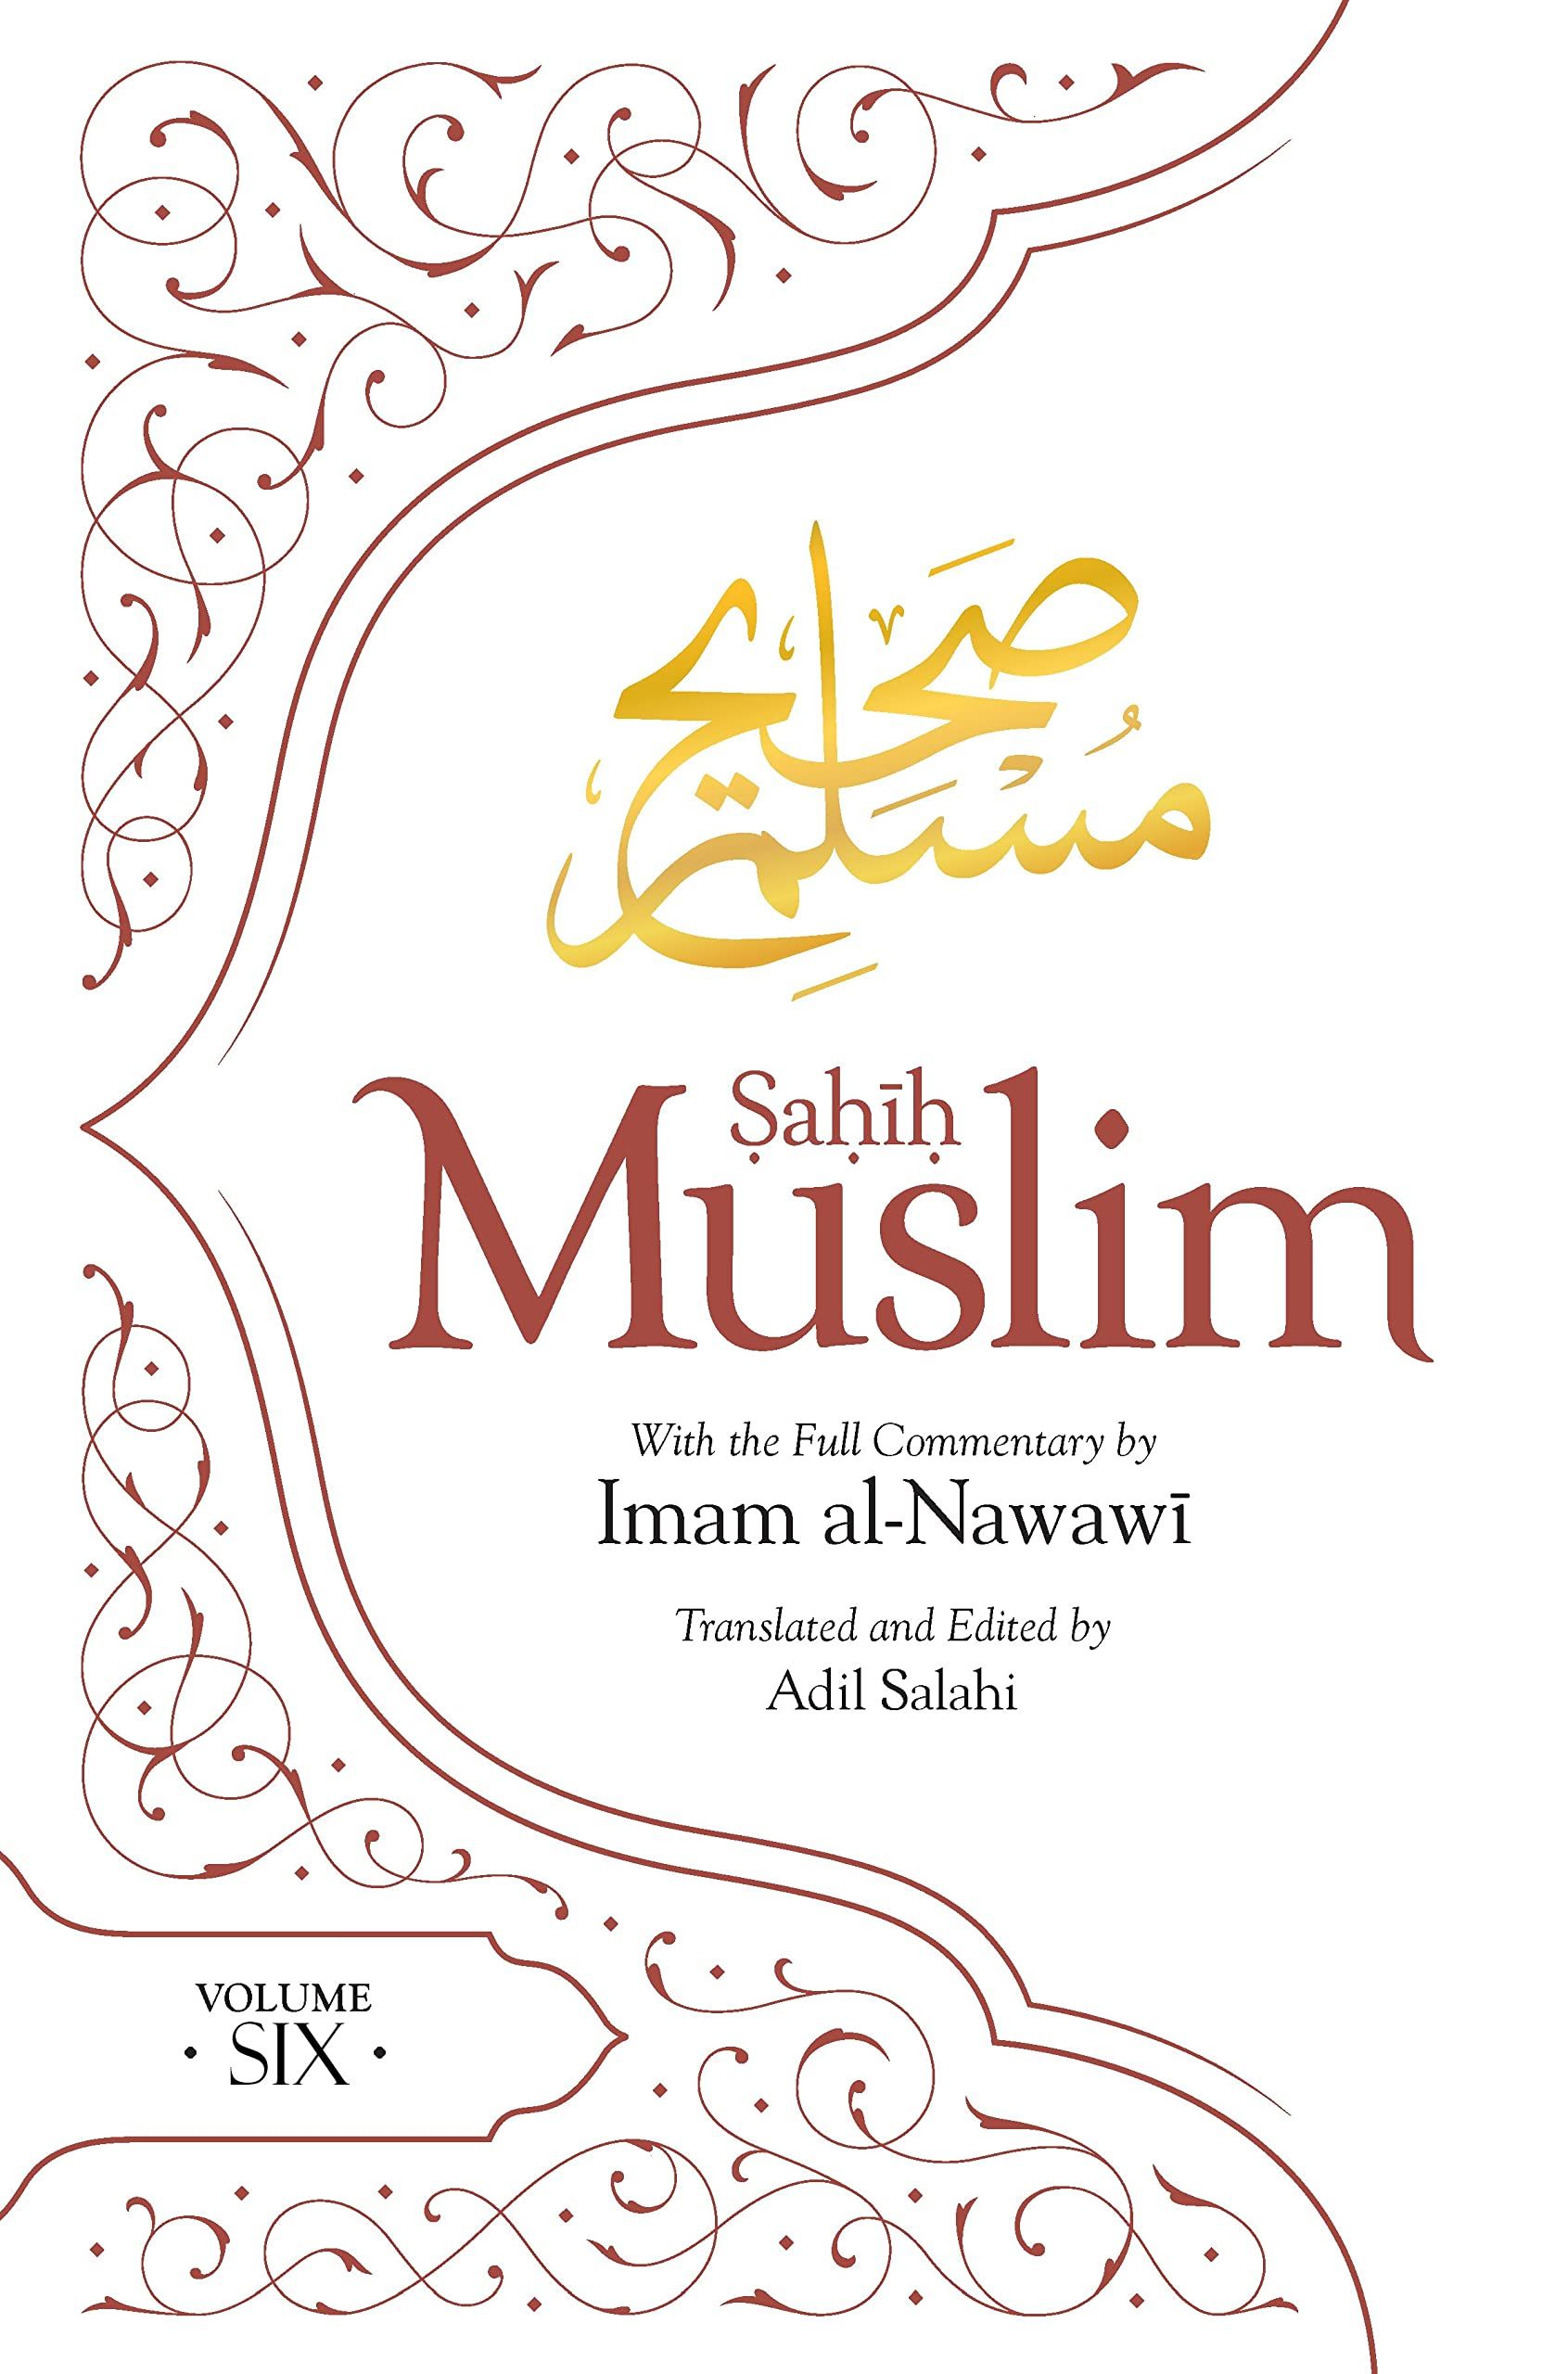 Sahih Muslim With Full Commentary By Imam Al-Nawawi: Volume 6